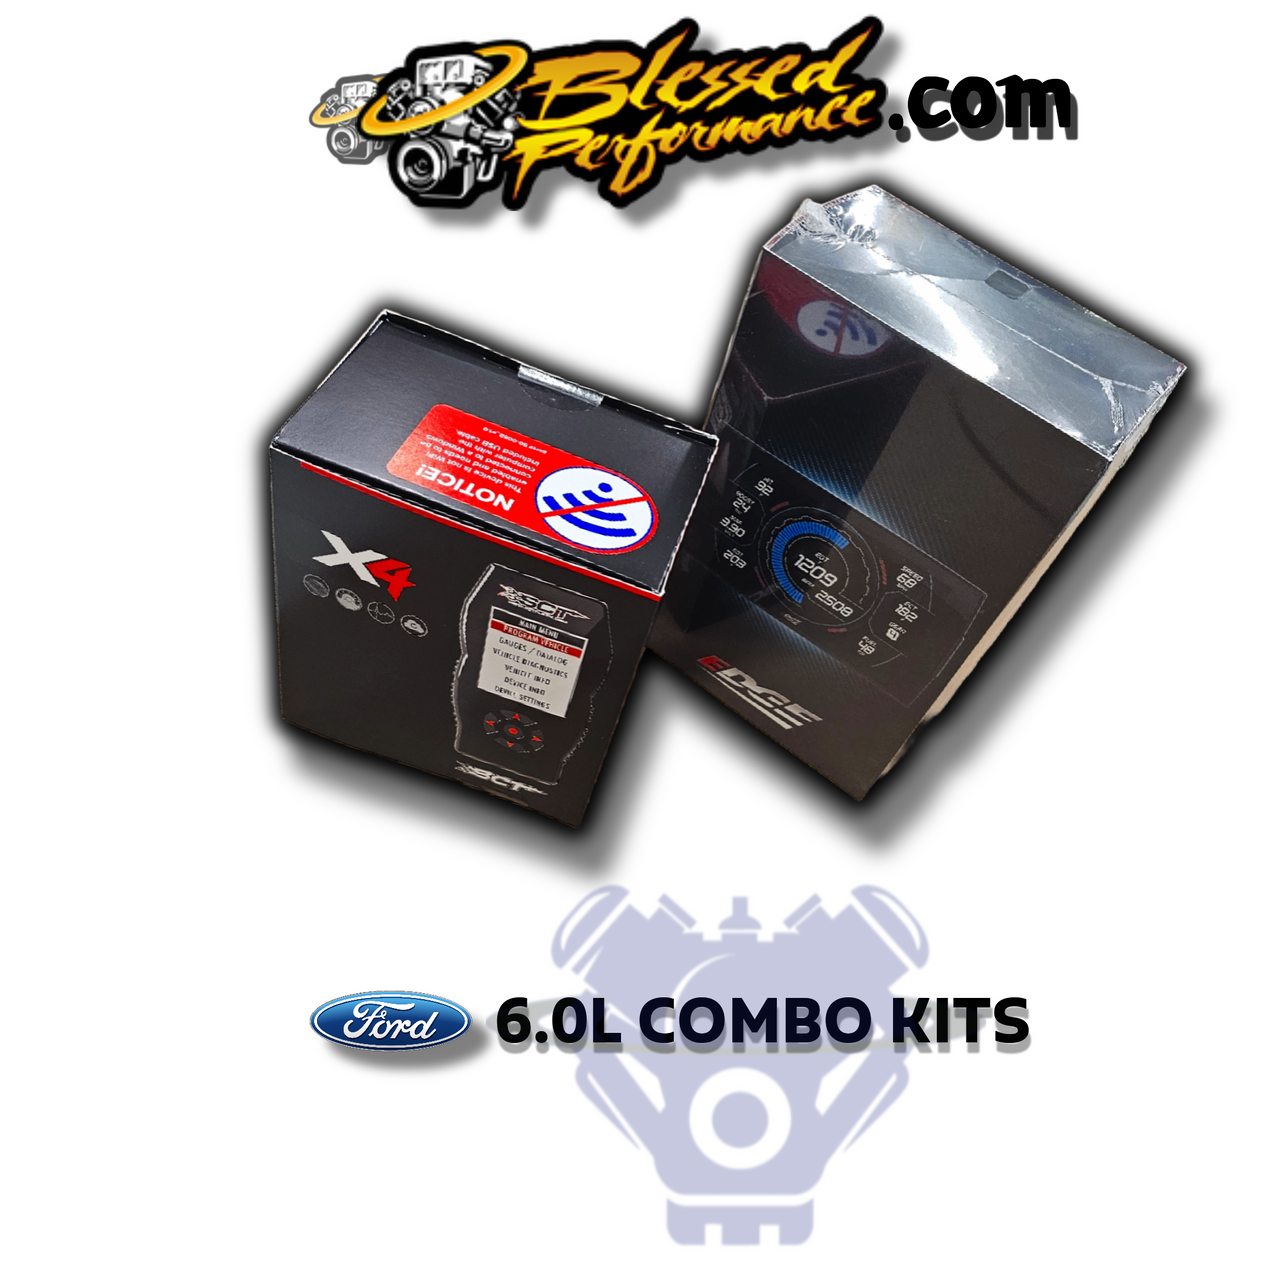  Blessed Performance 6.0 Combo Kit 2 View